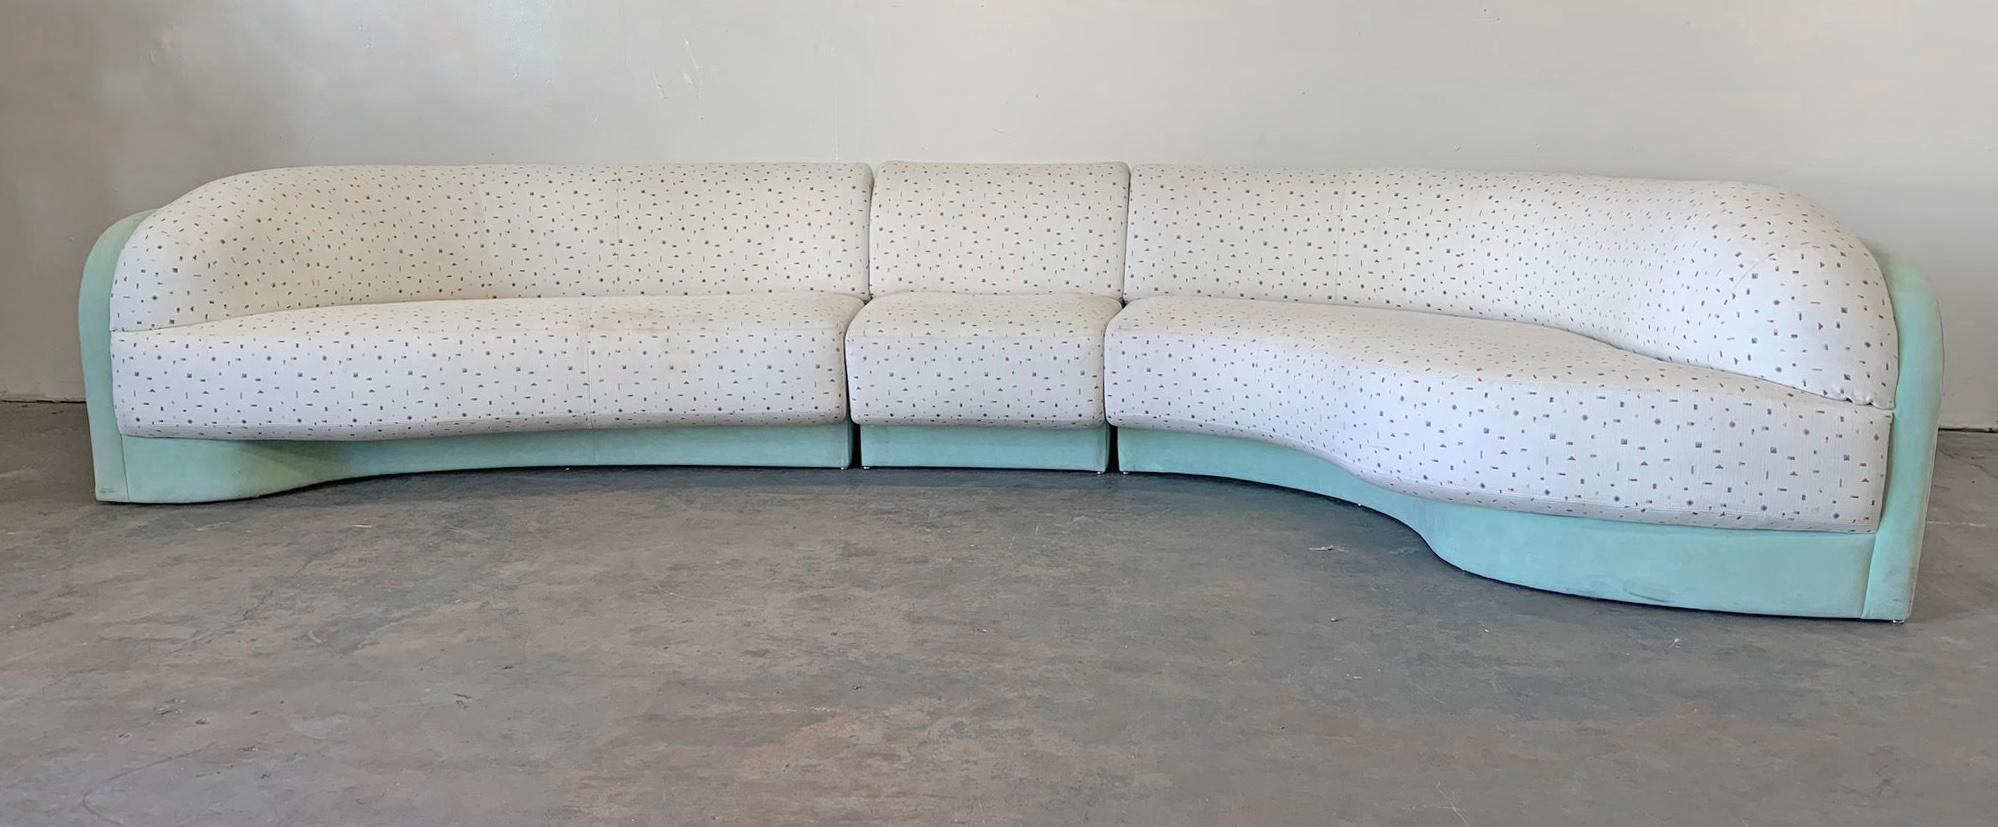 Available right now we have this stunning M. Fillmore Harty for Preview, tagged, 3-piece sectional. This sofa is absolutely right on trend right now and is so current with it's bold 1990s confetti patter with mint green microsuede accent. Very